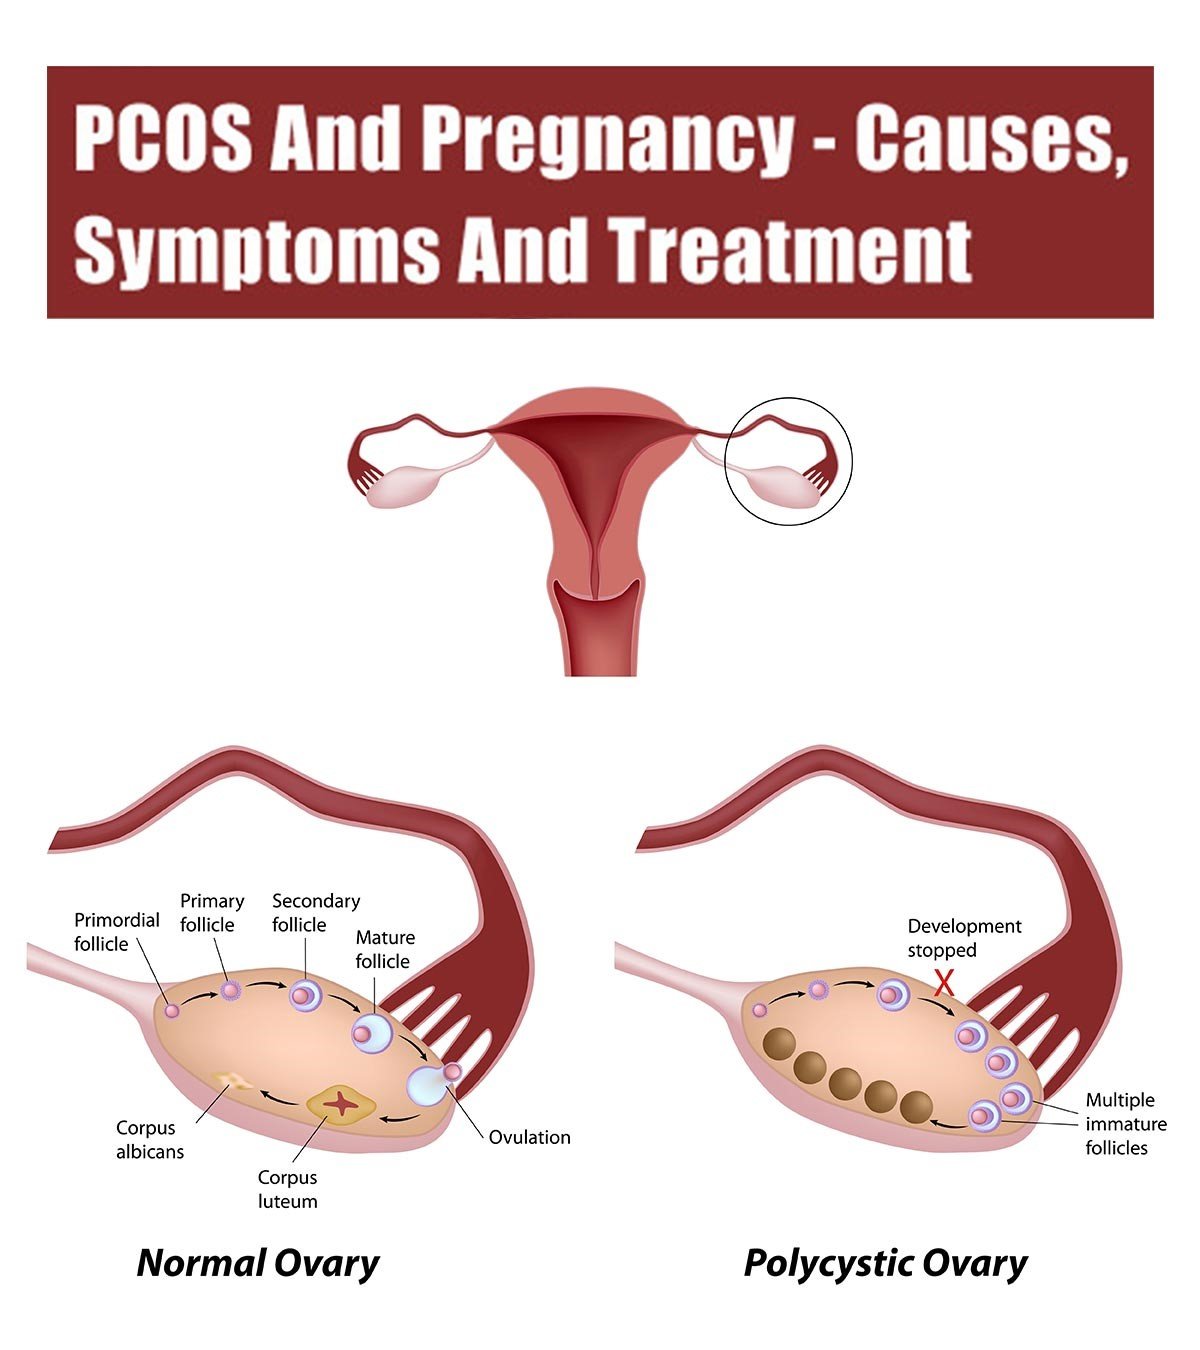 Can You Get Pregnant With PCOS?